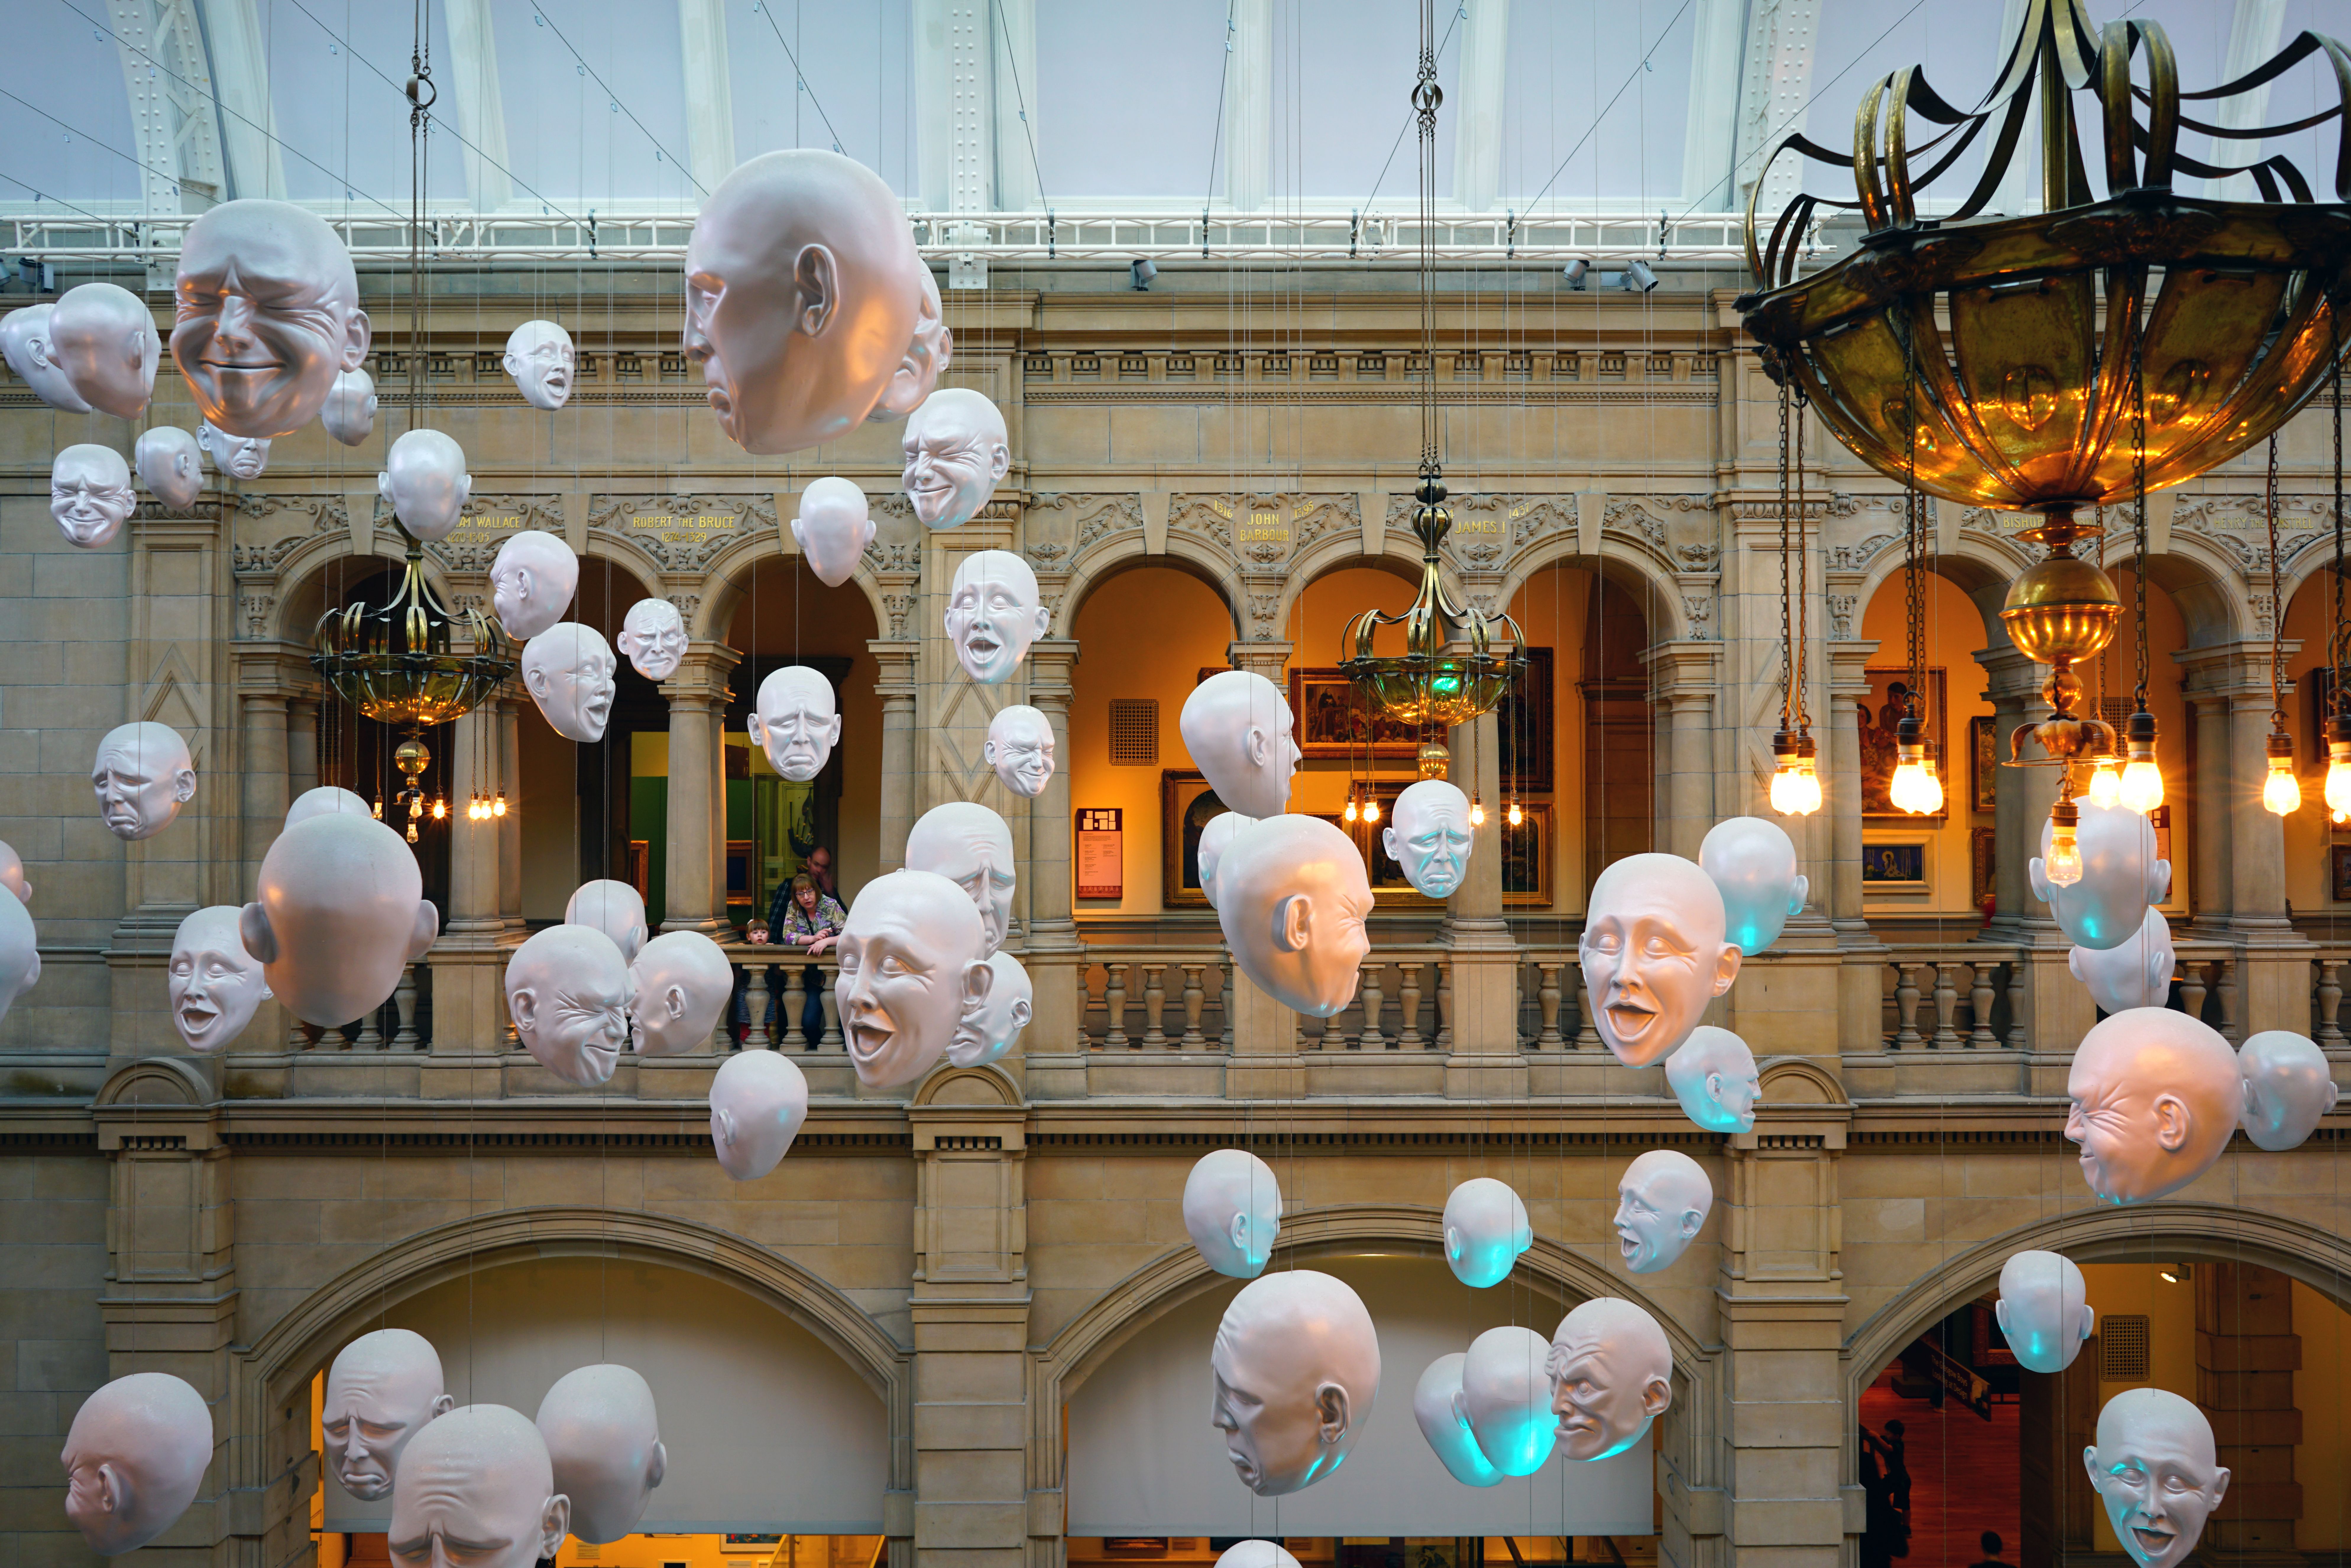 White heads suspended from the ceiling at the Kelvingrove Art Gallery and Museum, Glasgow